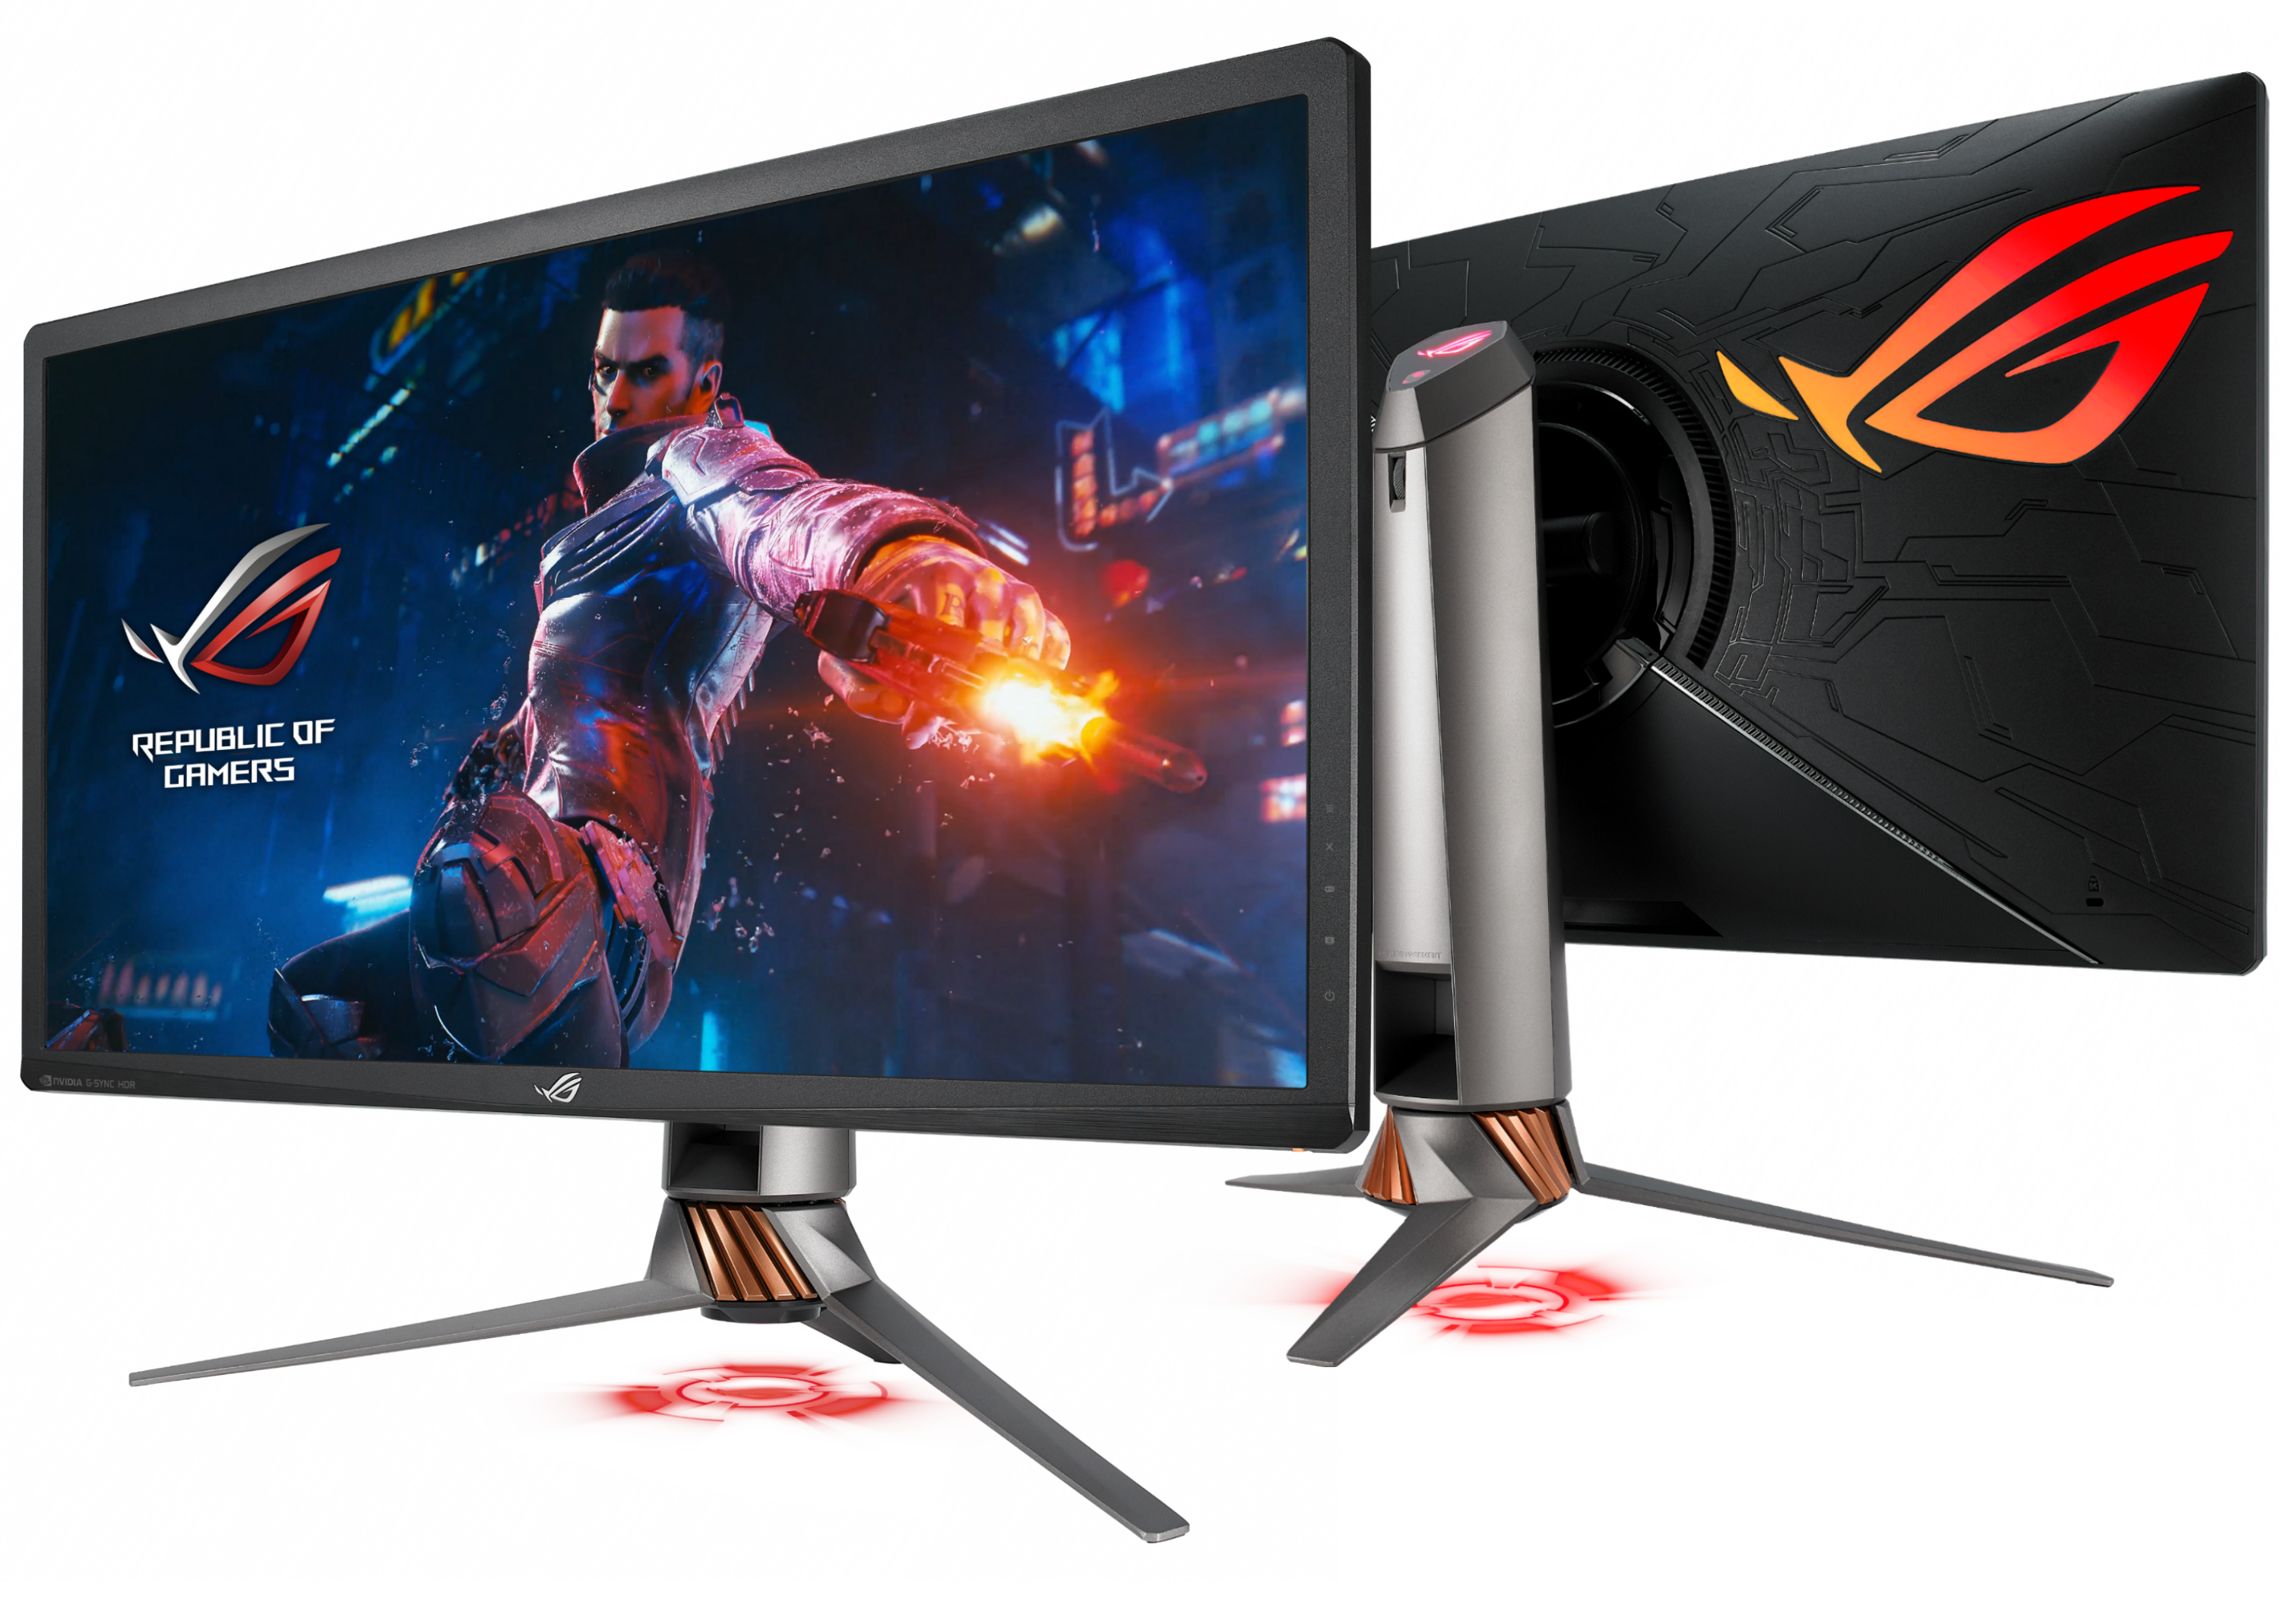 G-SYNC ULTIMATE Mini LED HDR Monitors Unveiled At Computex 2019: The